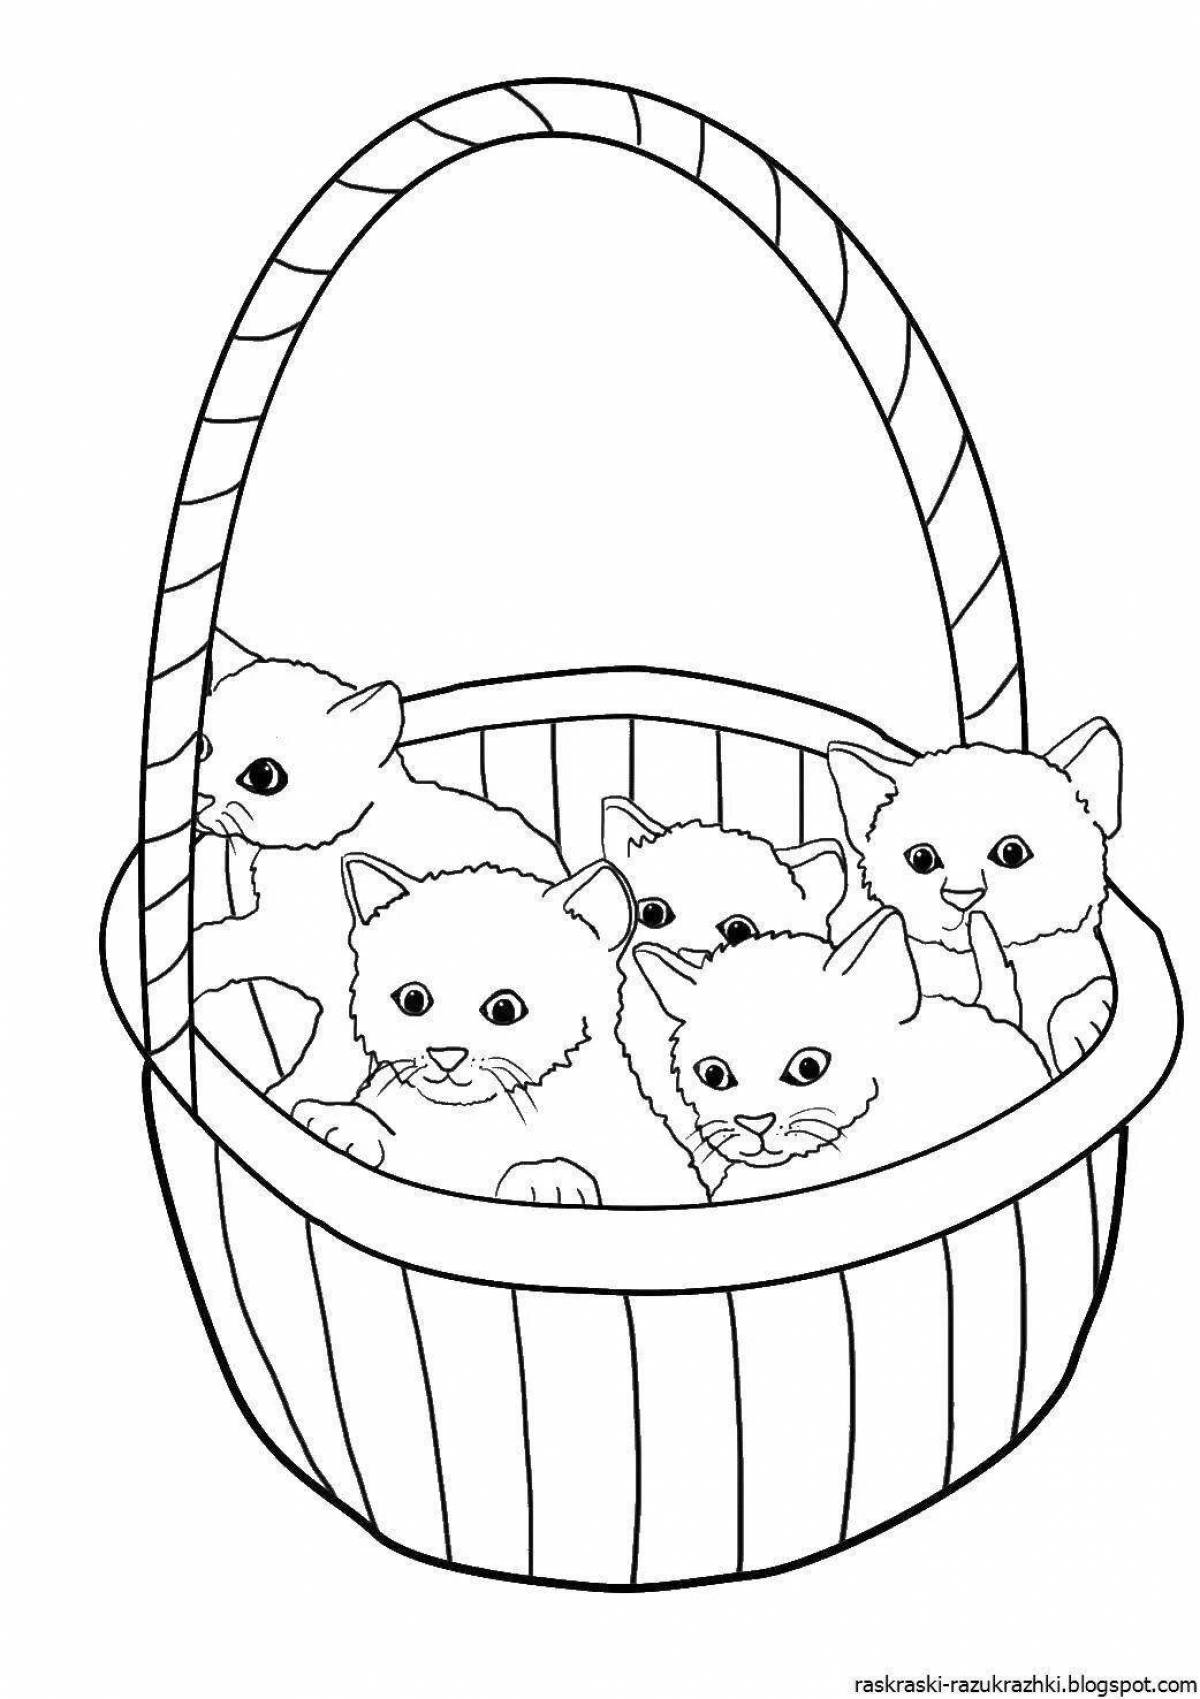 Funny kitten coloring book for kids 5-6 years old